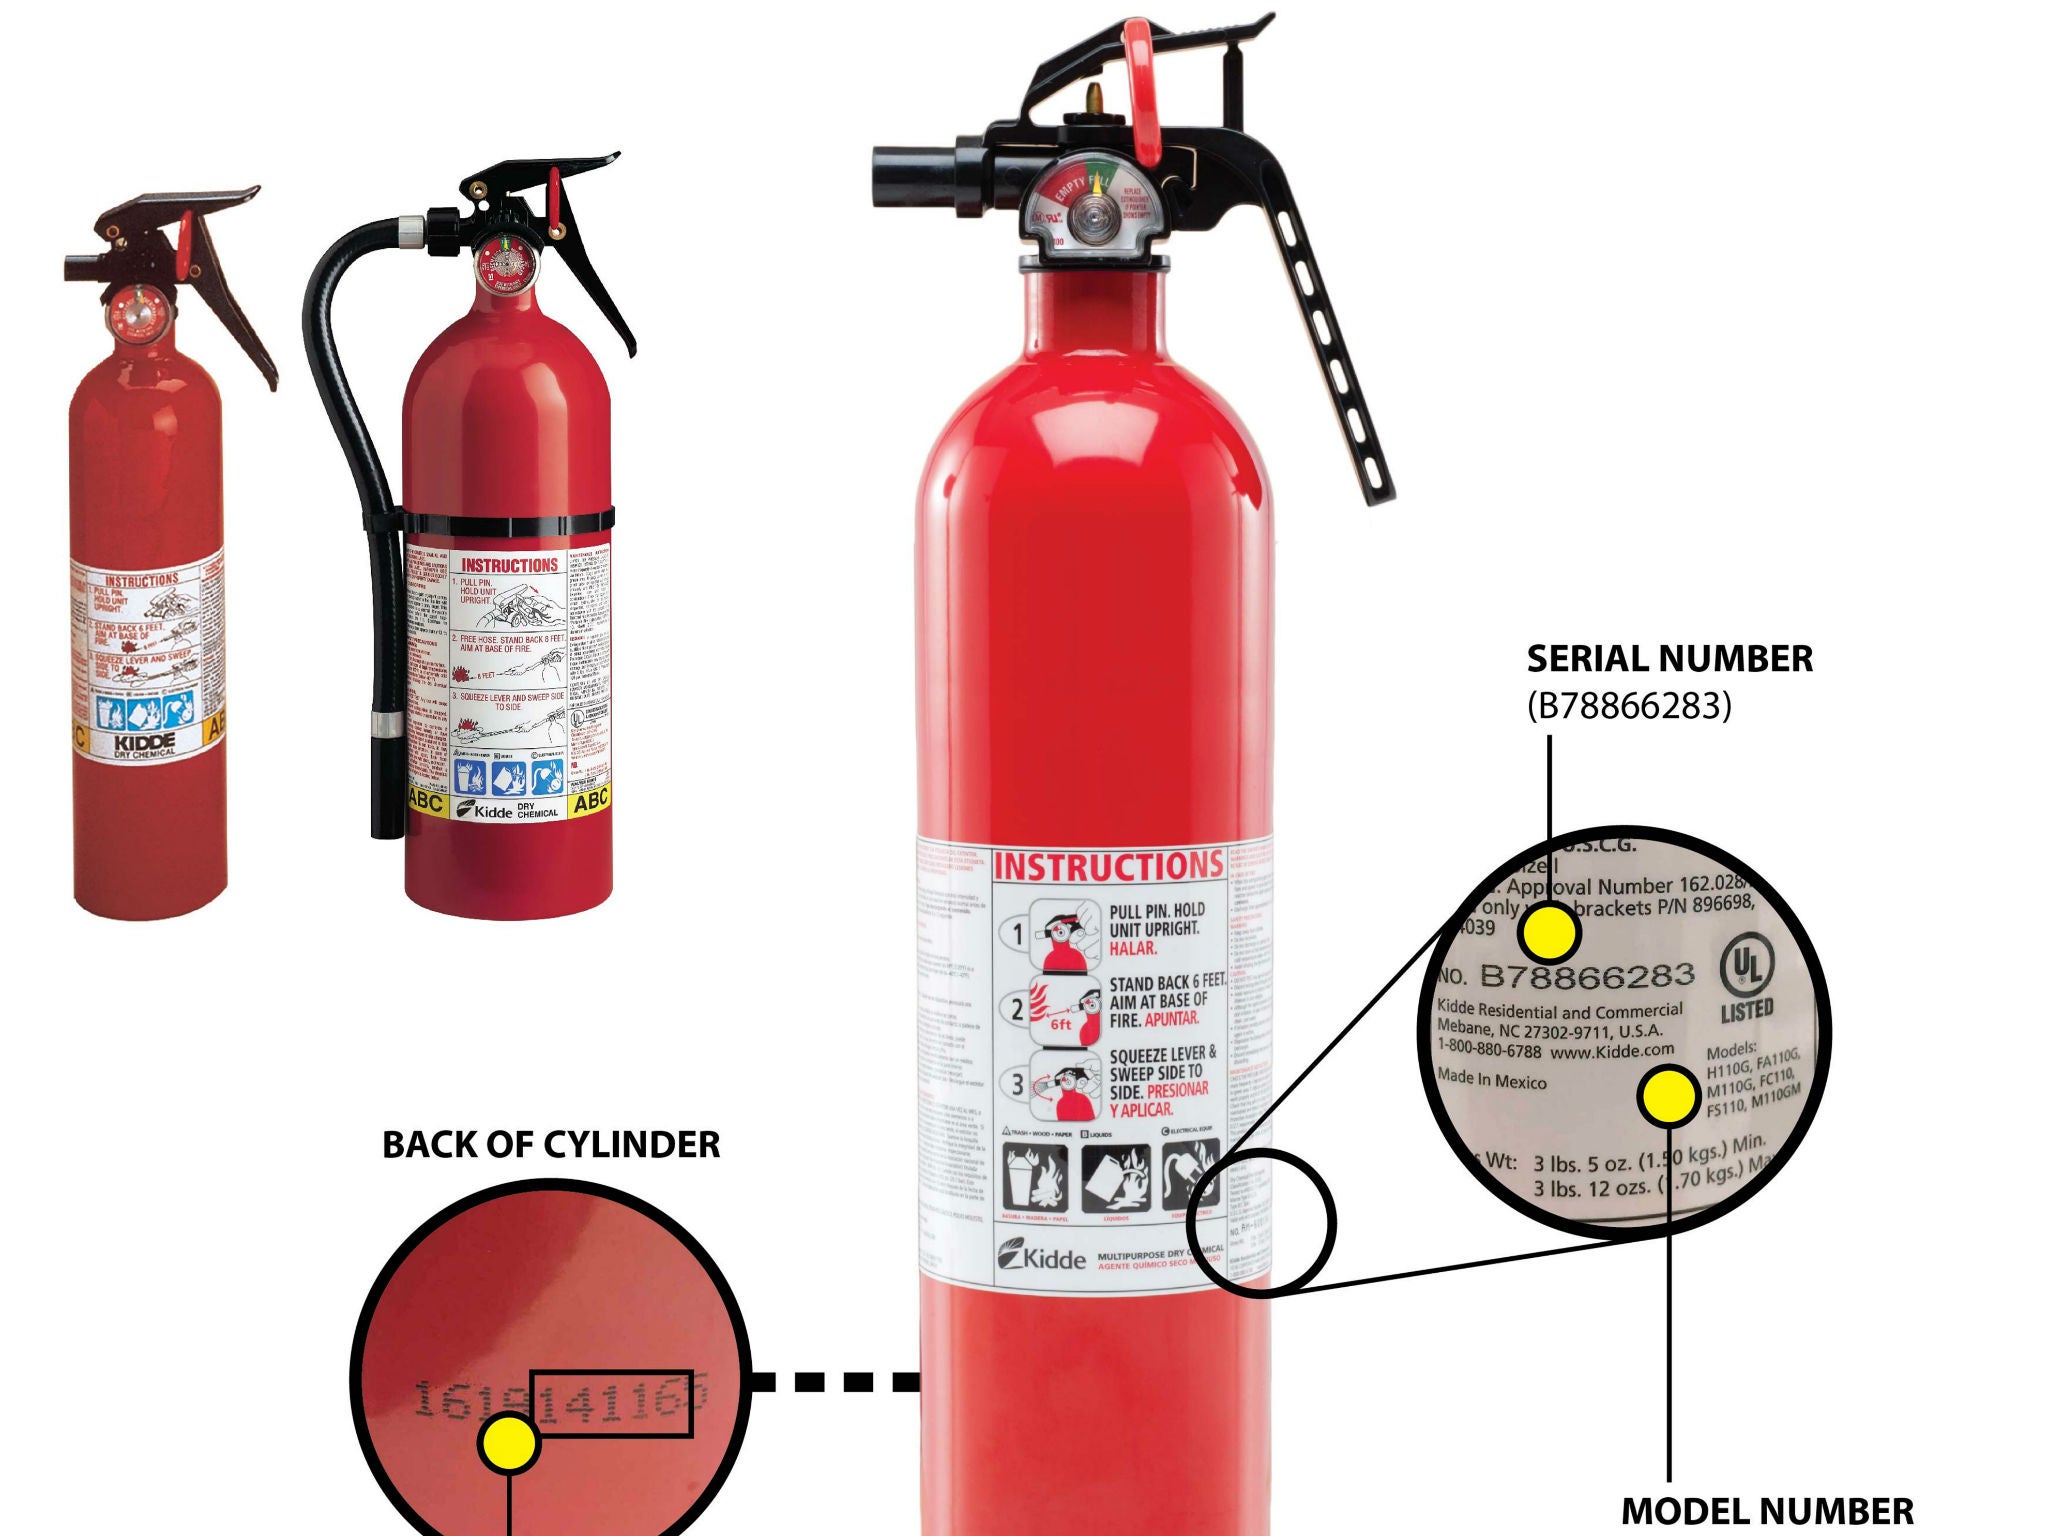 An example of the recalled fire extinguishers